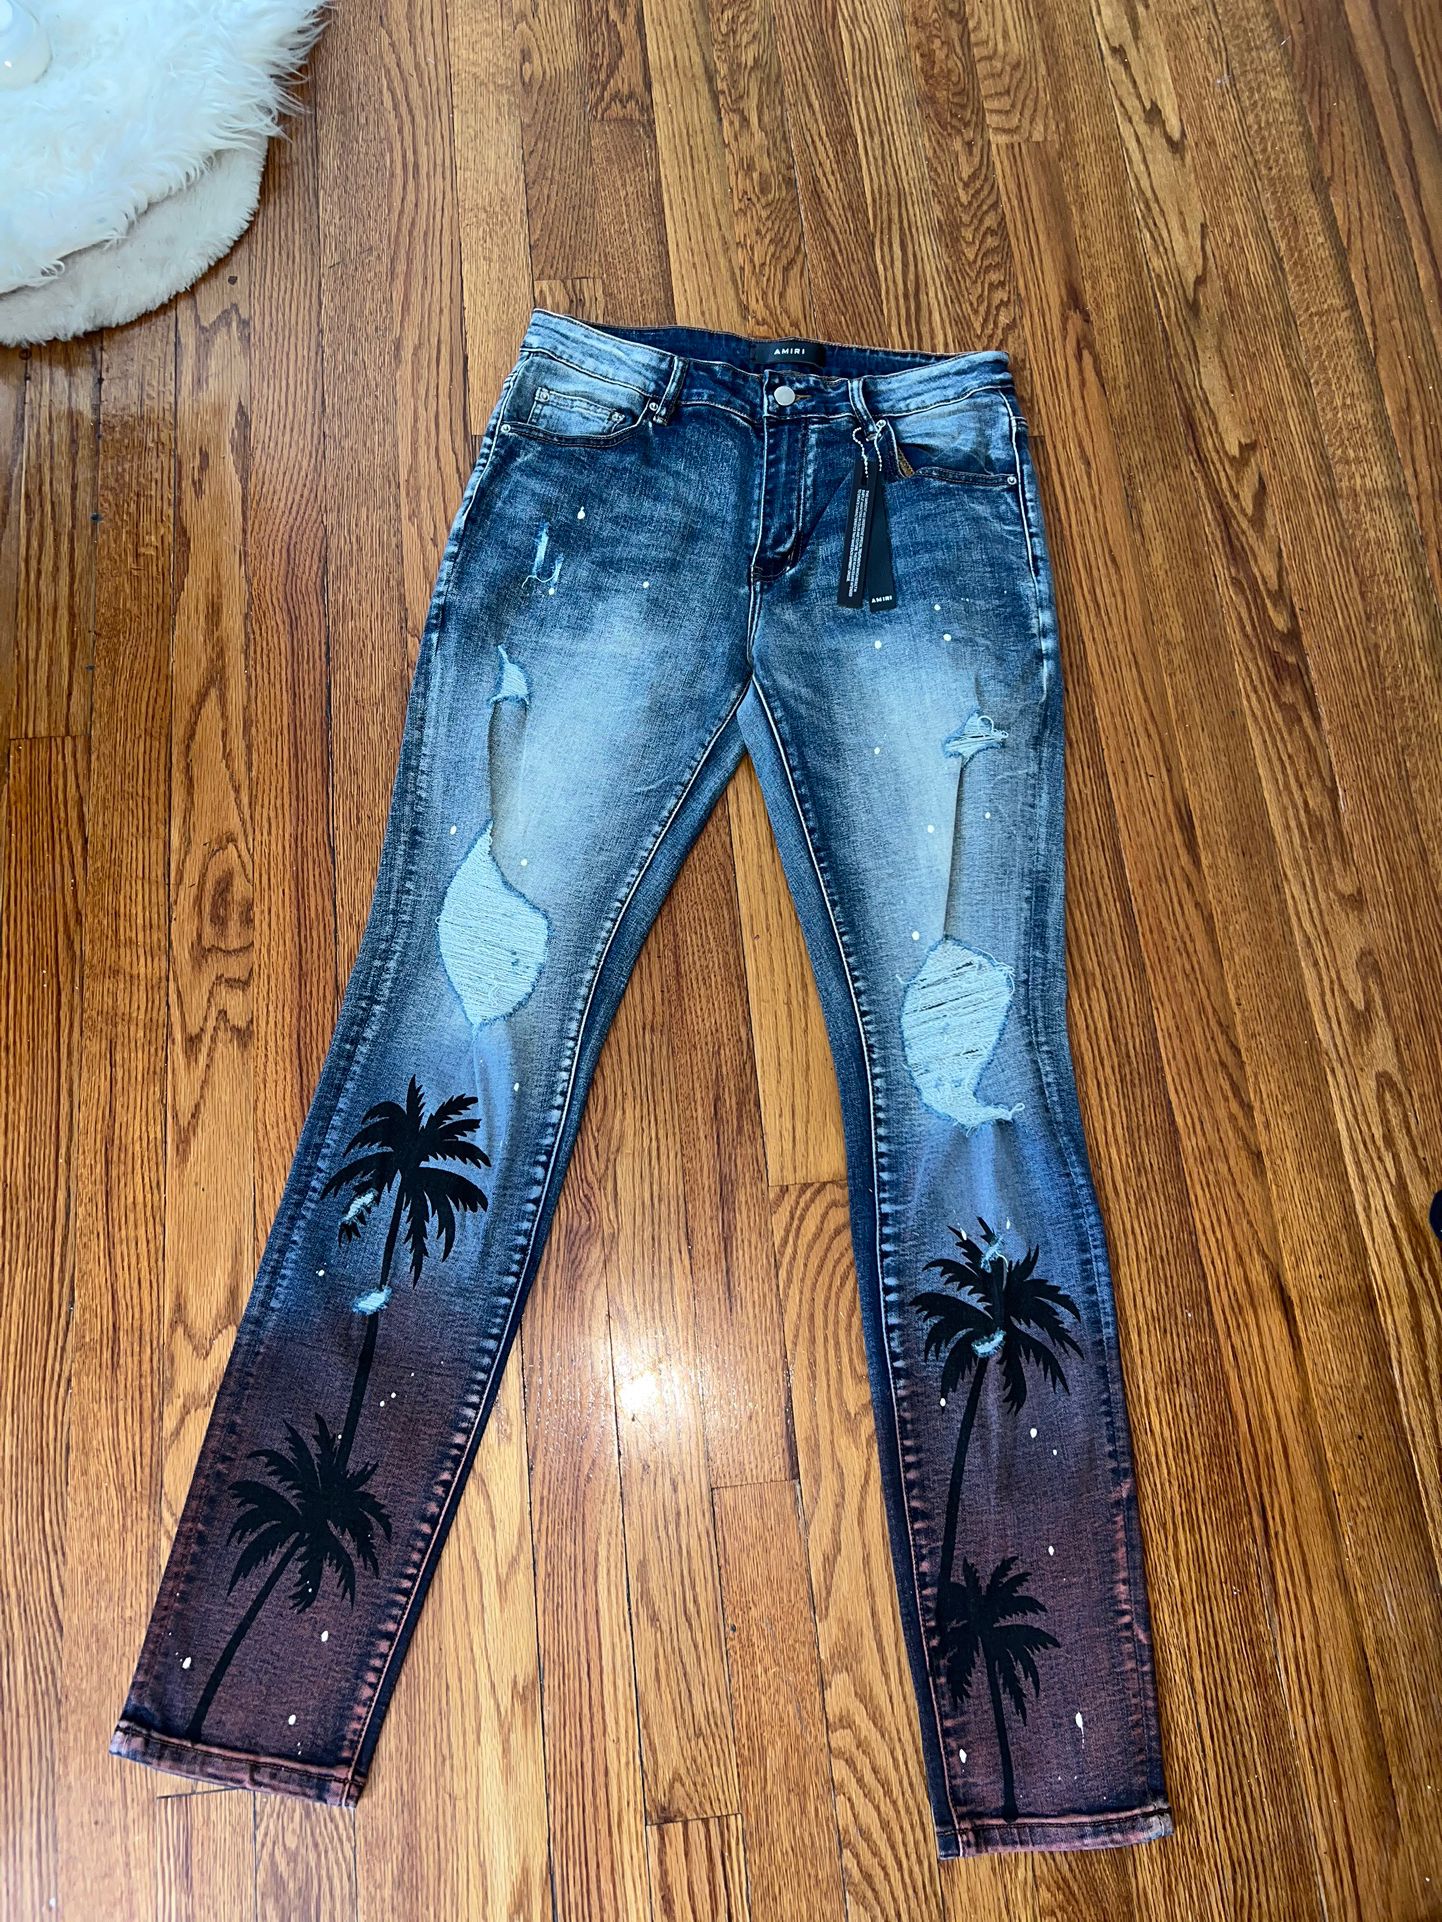 Jeans Amiri for in NJ - OfferUp